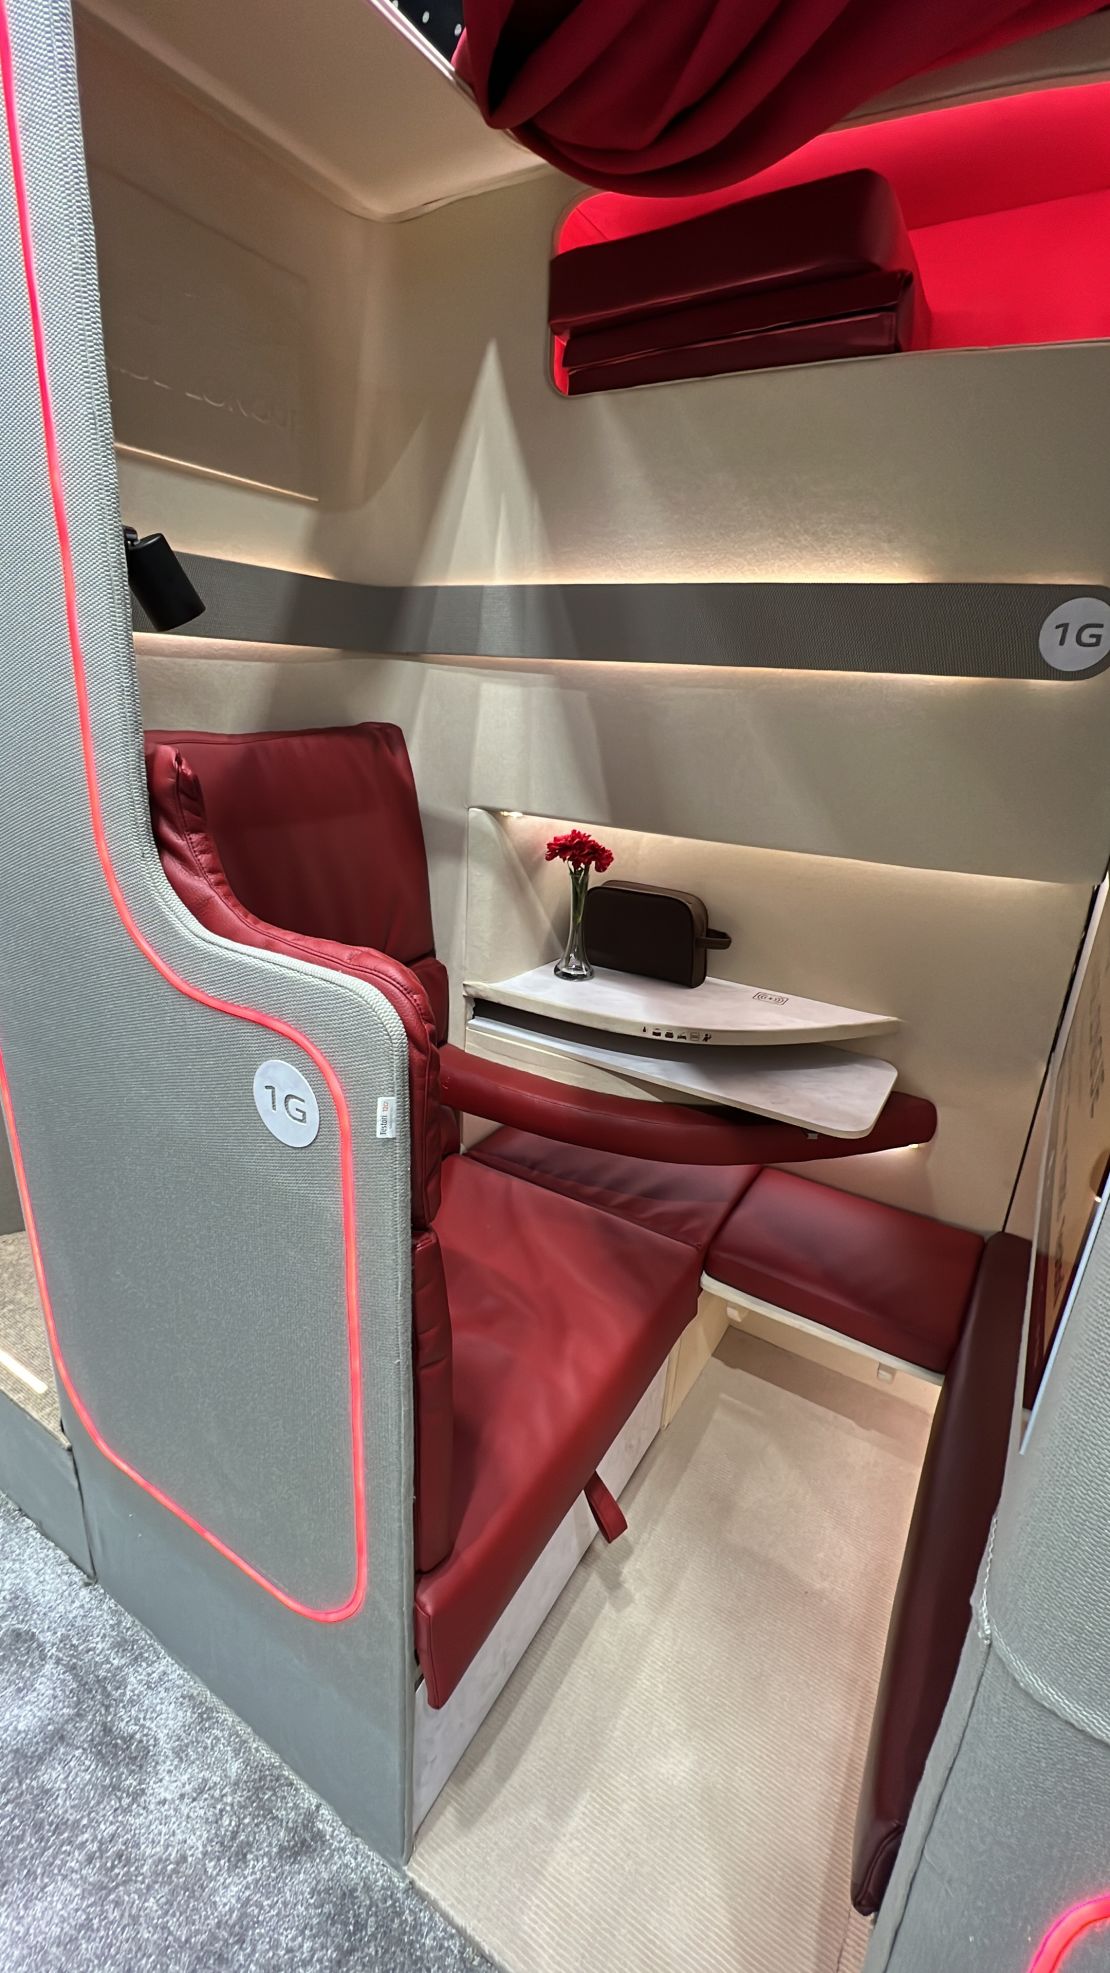 Here's the lower level of the business-class/first-class version of the dual-level seat concept.